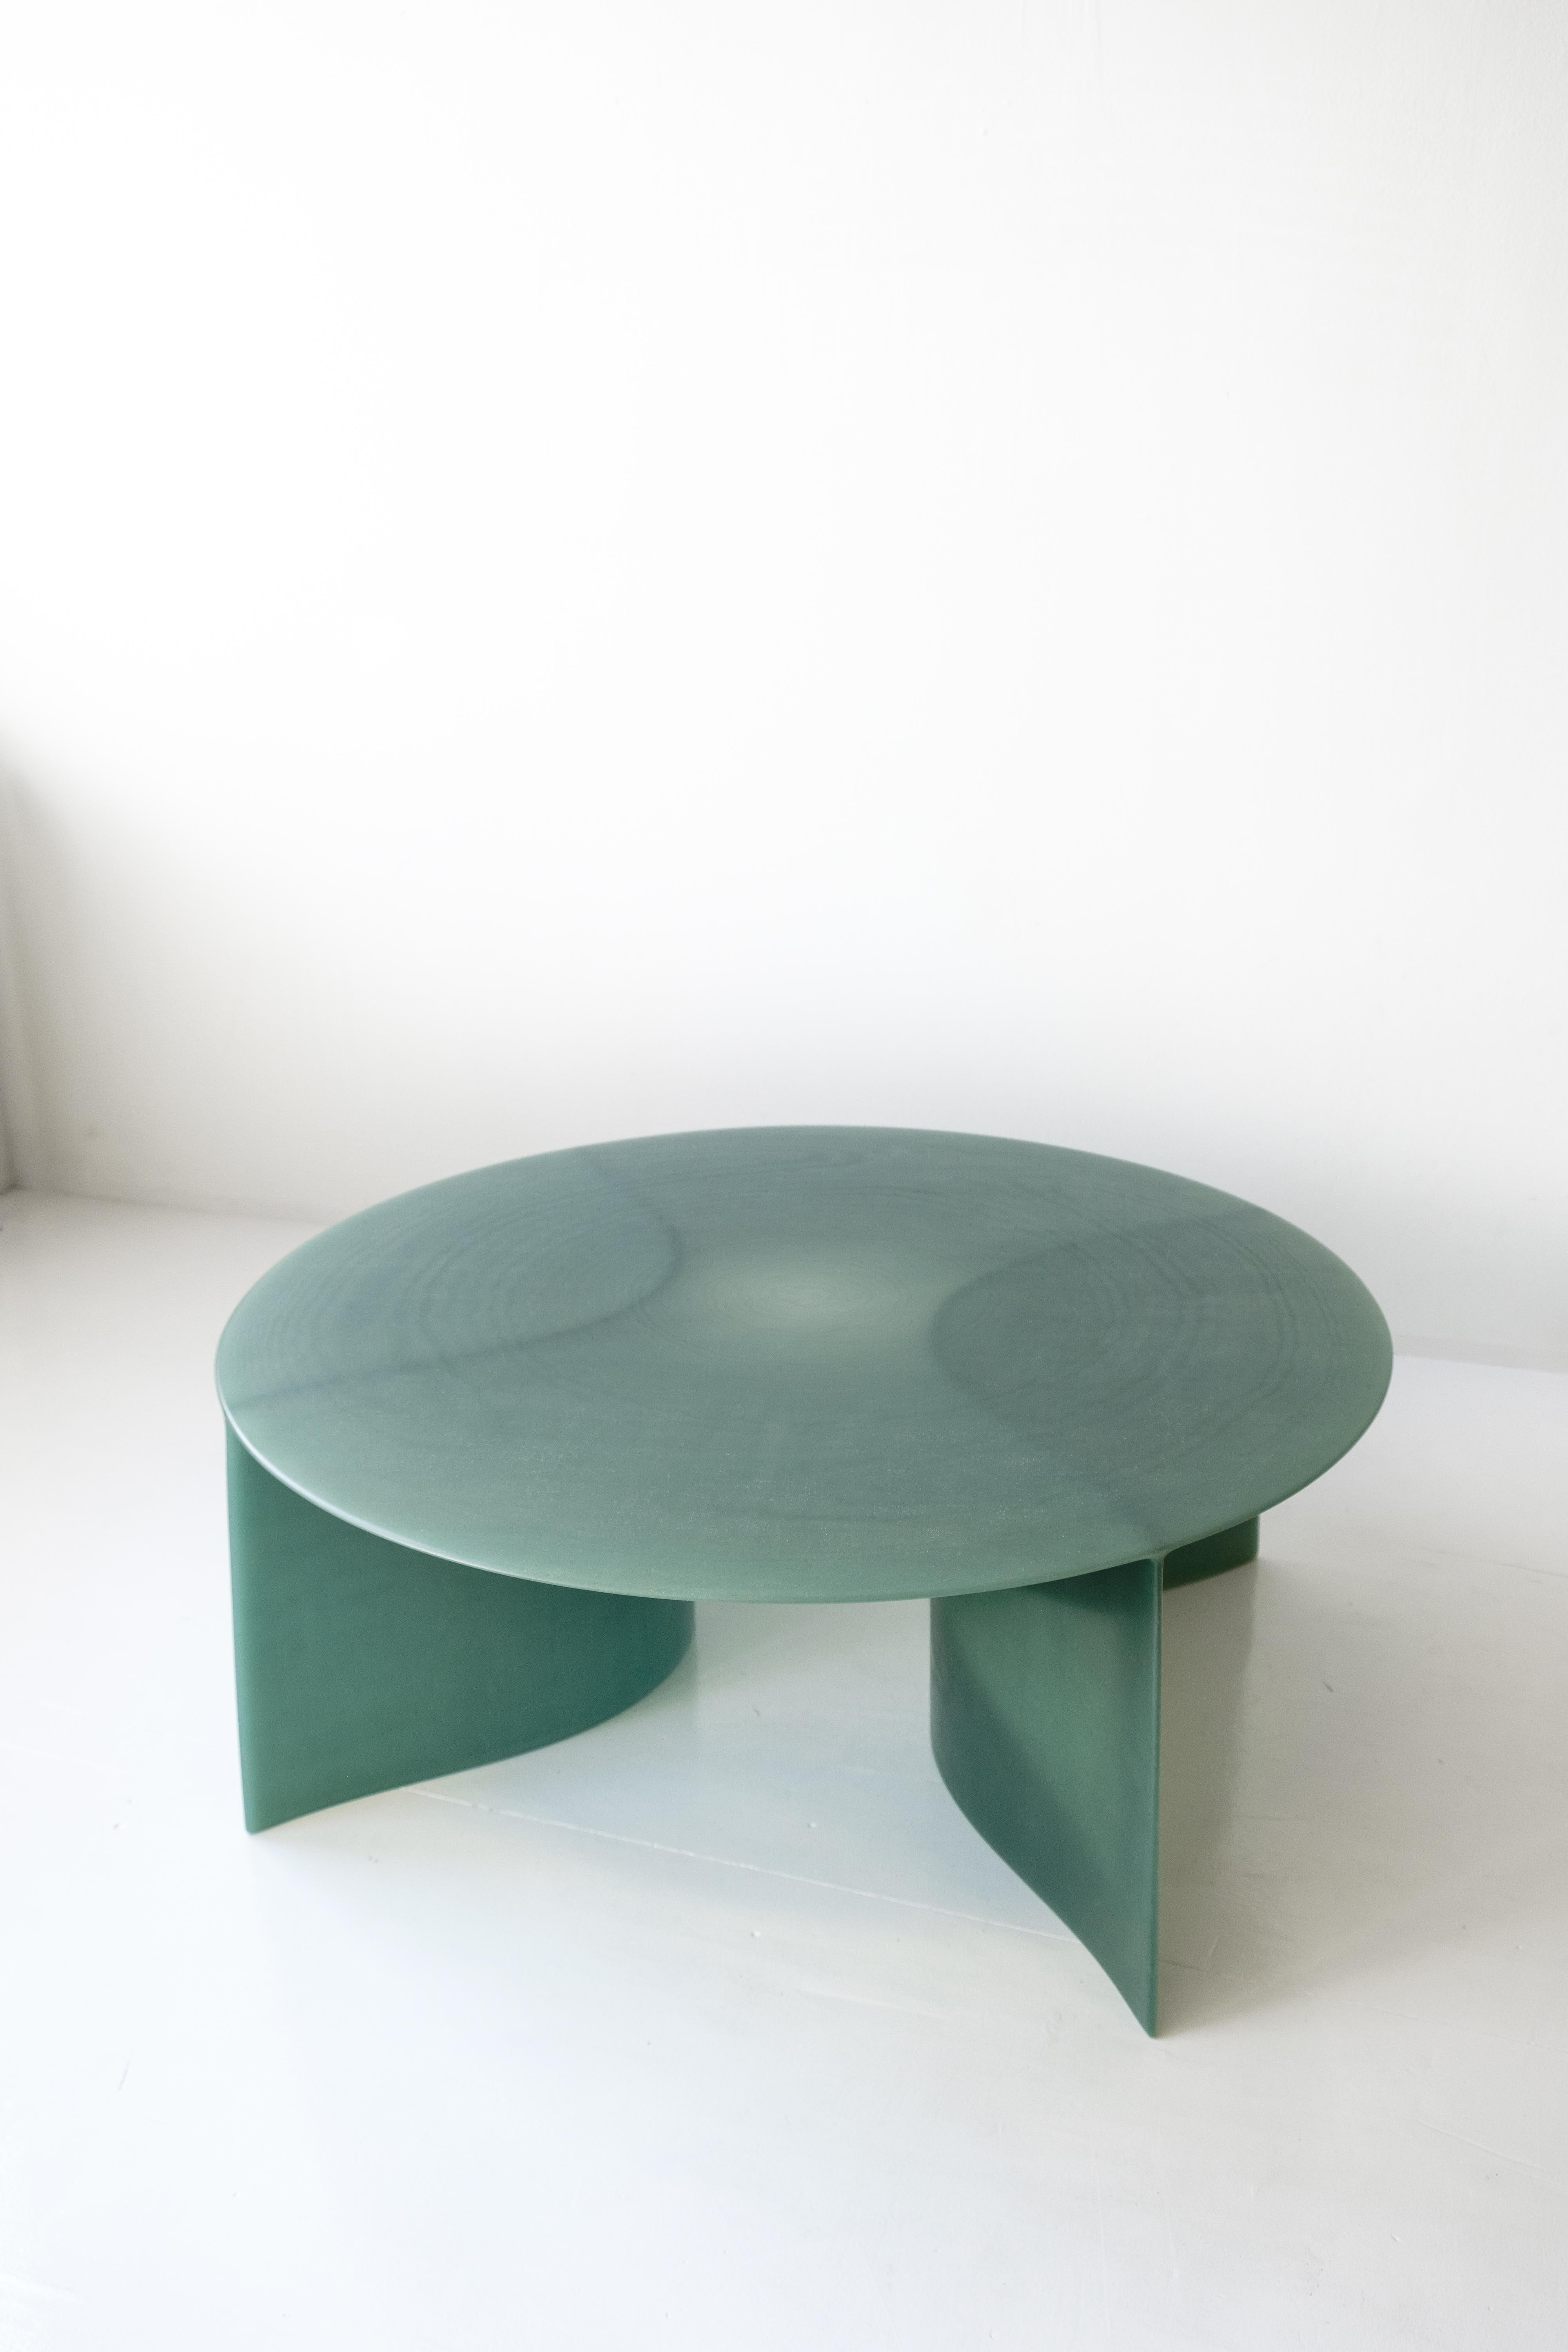 Contemporary Green Fiberglass, New Wave Coffee Table Round 120cm, by Lukas Cober For Sale 3